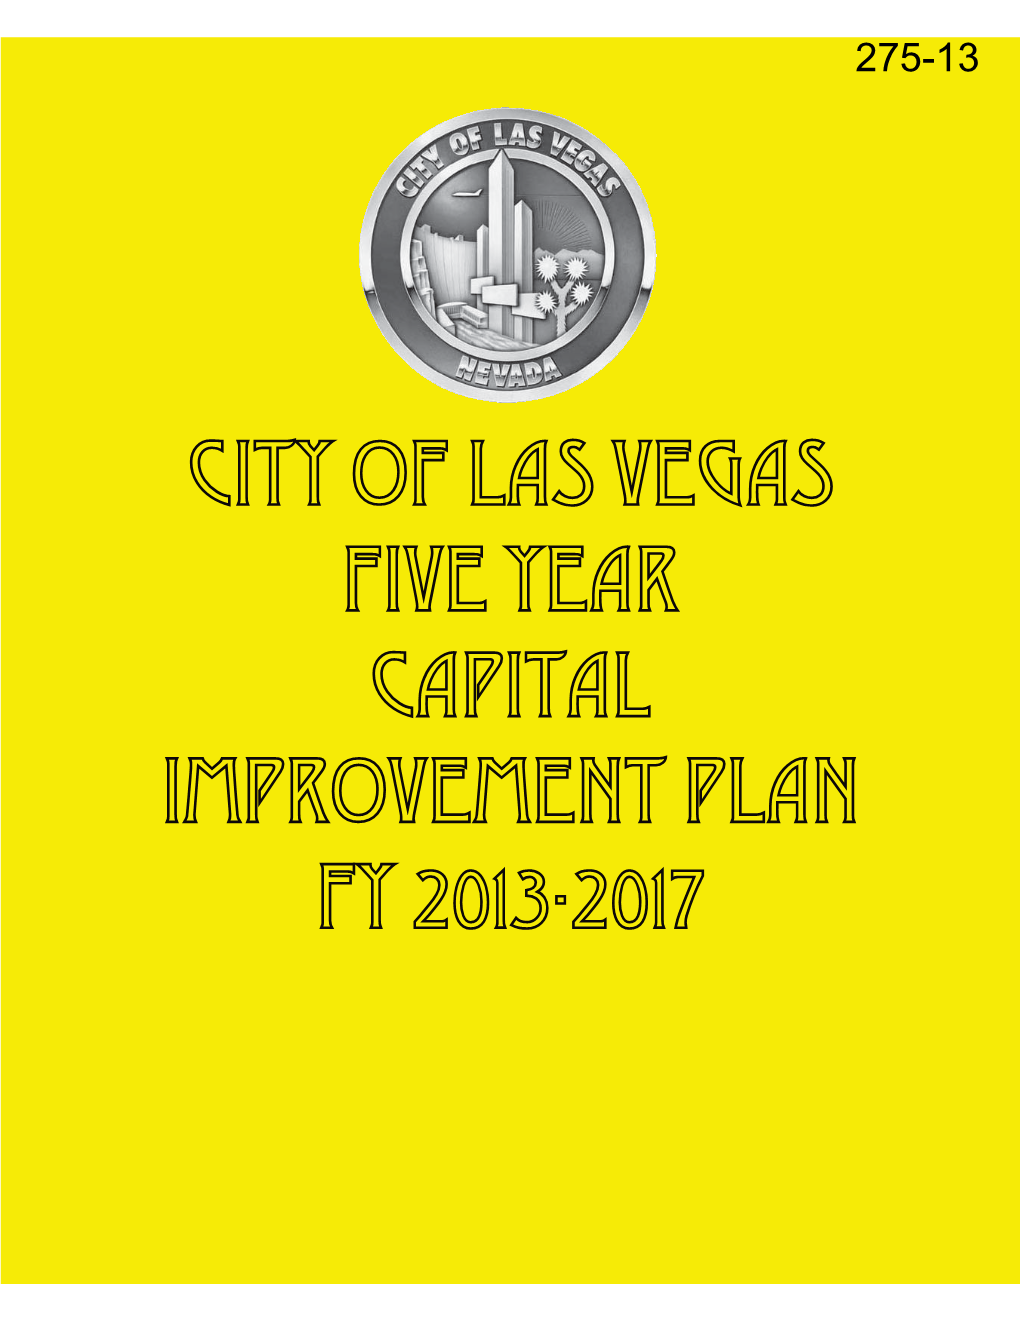 CITY of LAS VEGAS FIVE YEAR CAPITAL IMPROVEMENT PLAN FY 2013-2017 in Keeping with the City’S Sustainability Efforts, This Book Has Been Printed on Recycled Paper